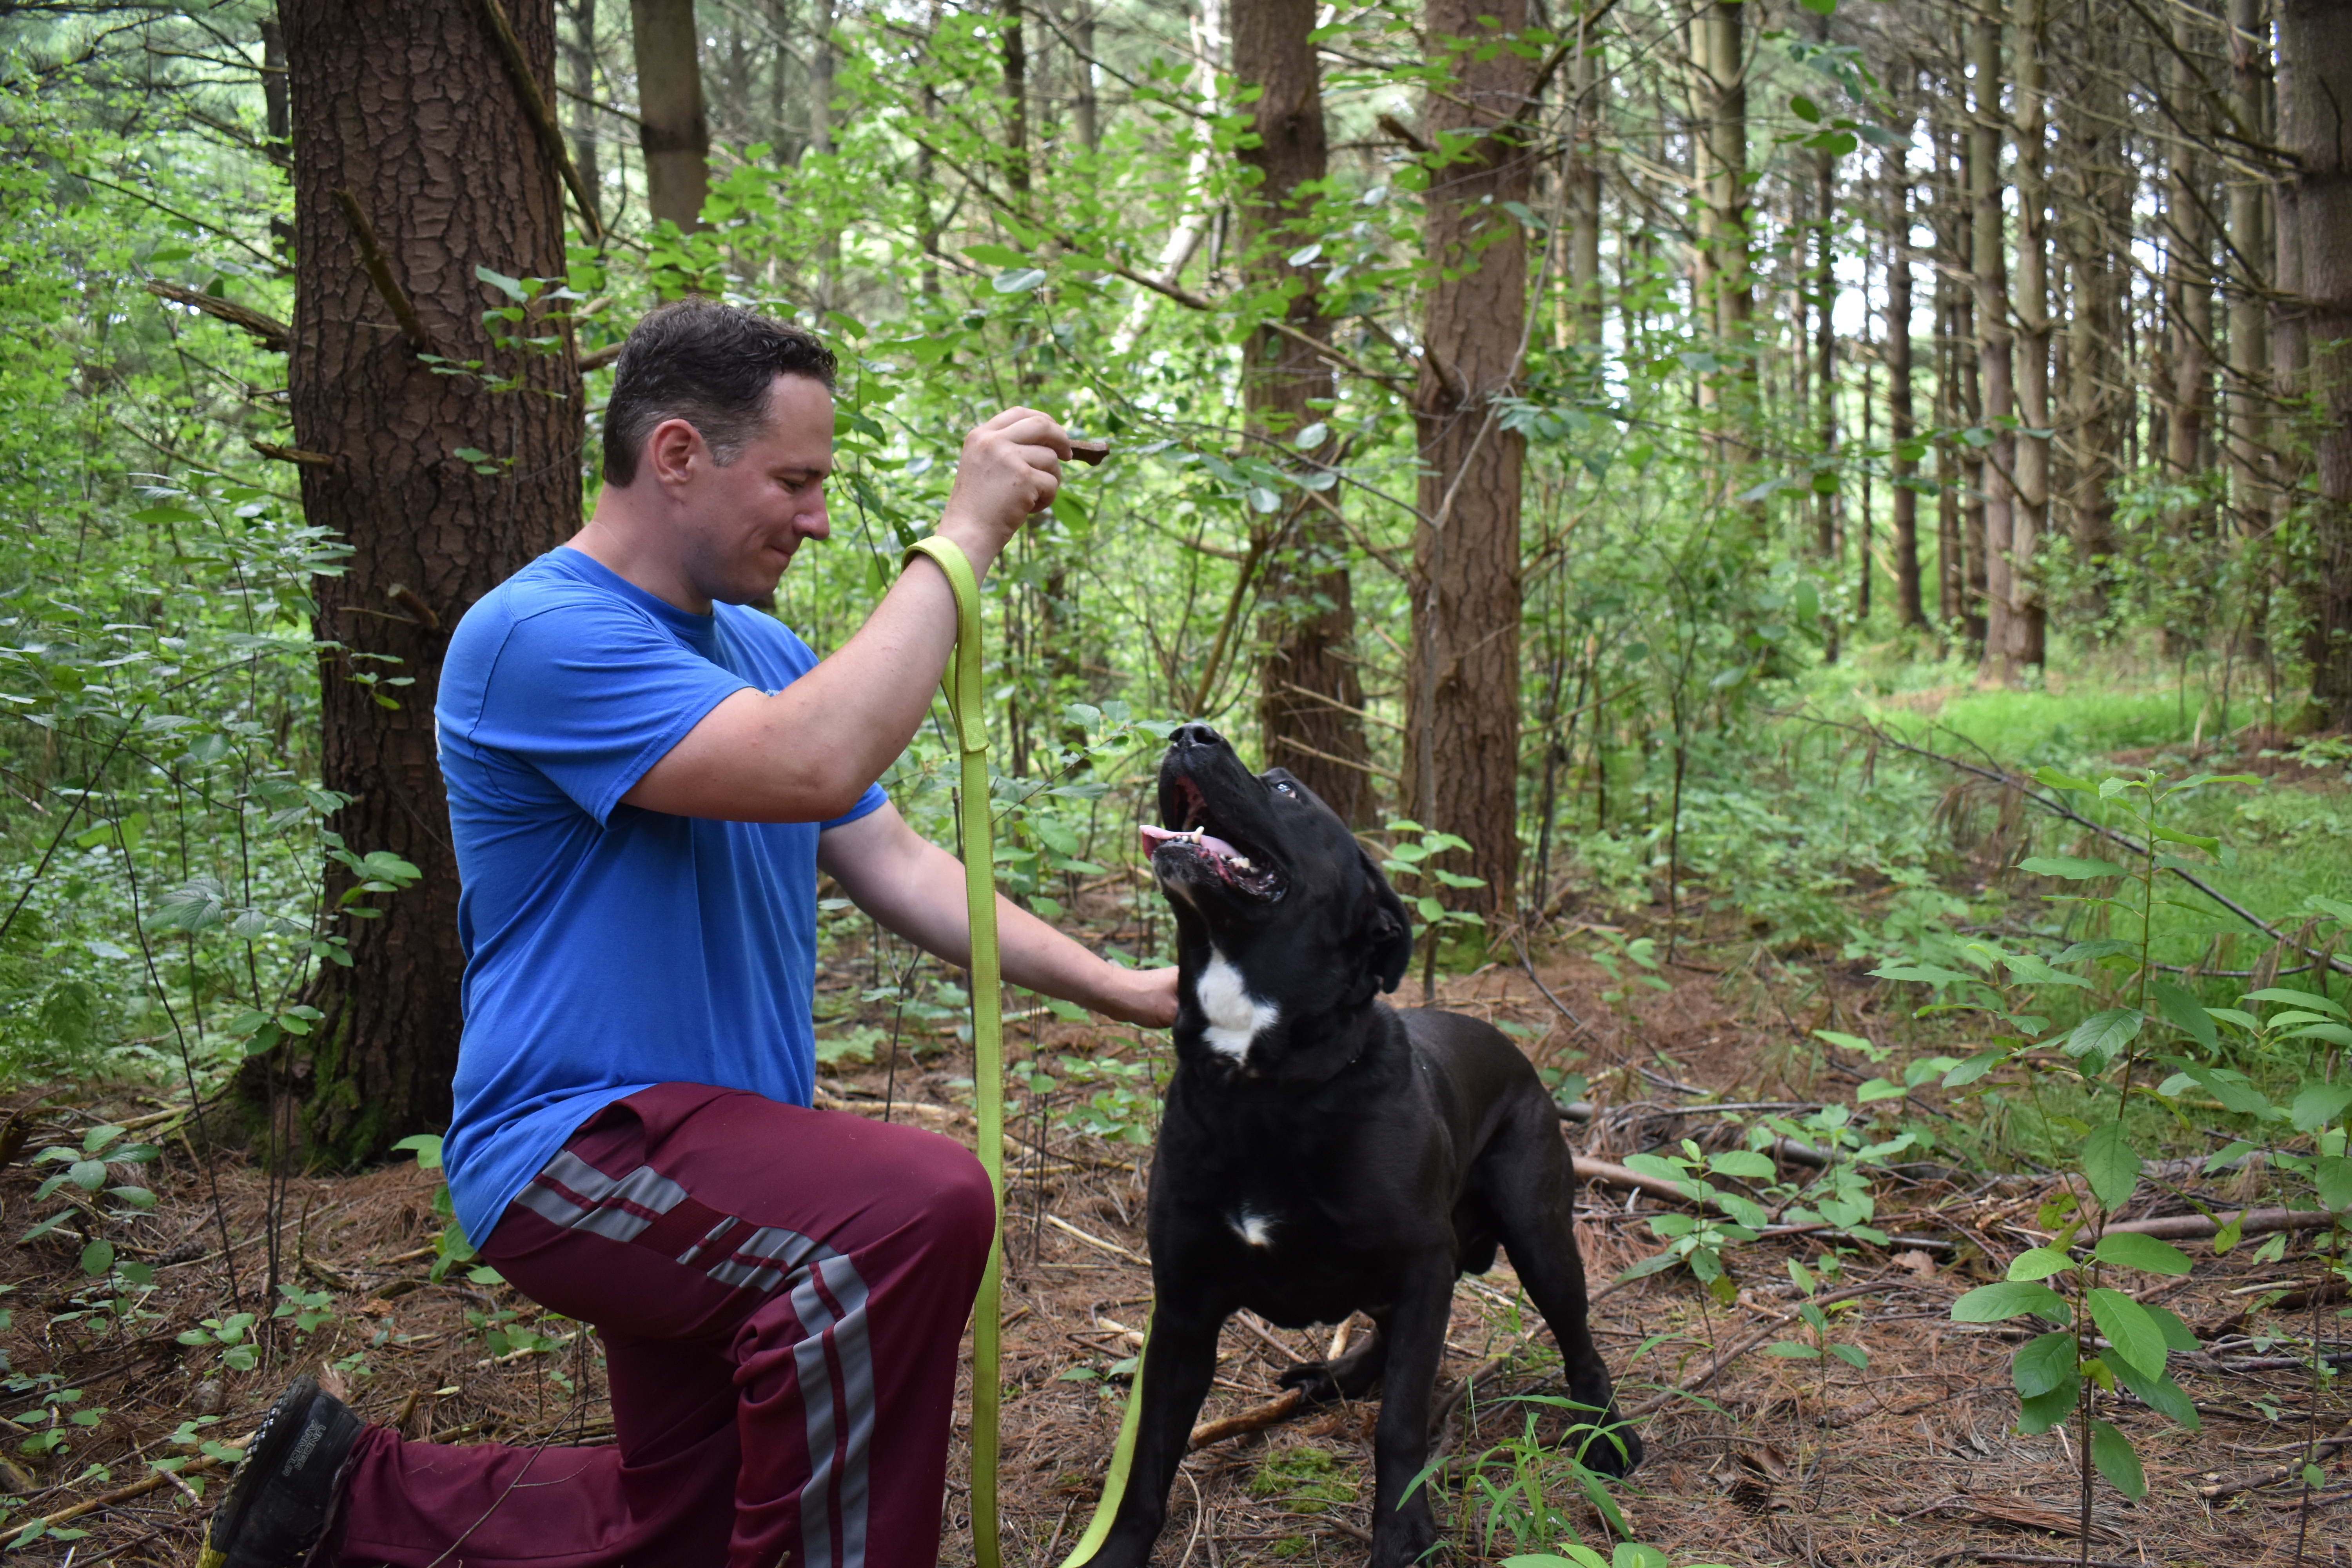 Jason Cooke shows how well-behaved Oliver is during a walk in the woods.